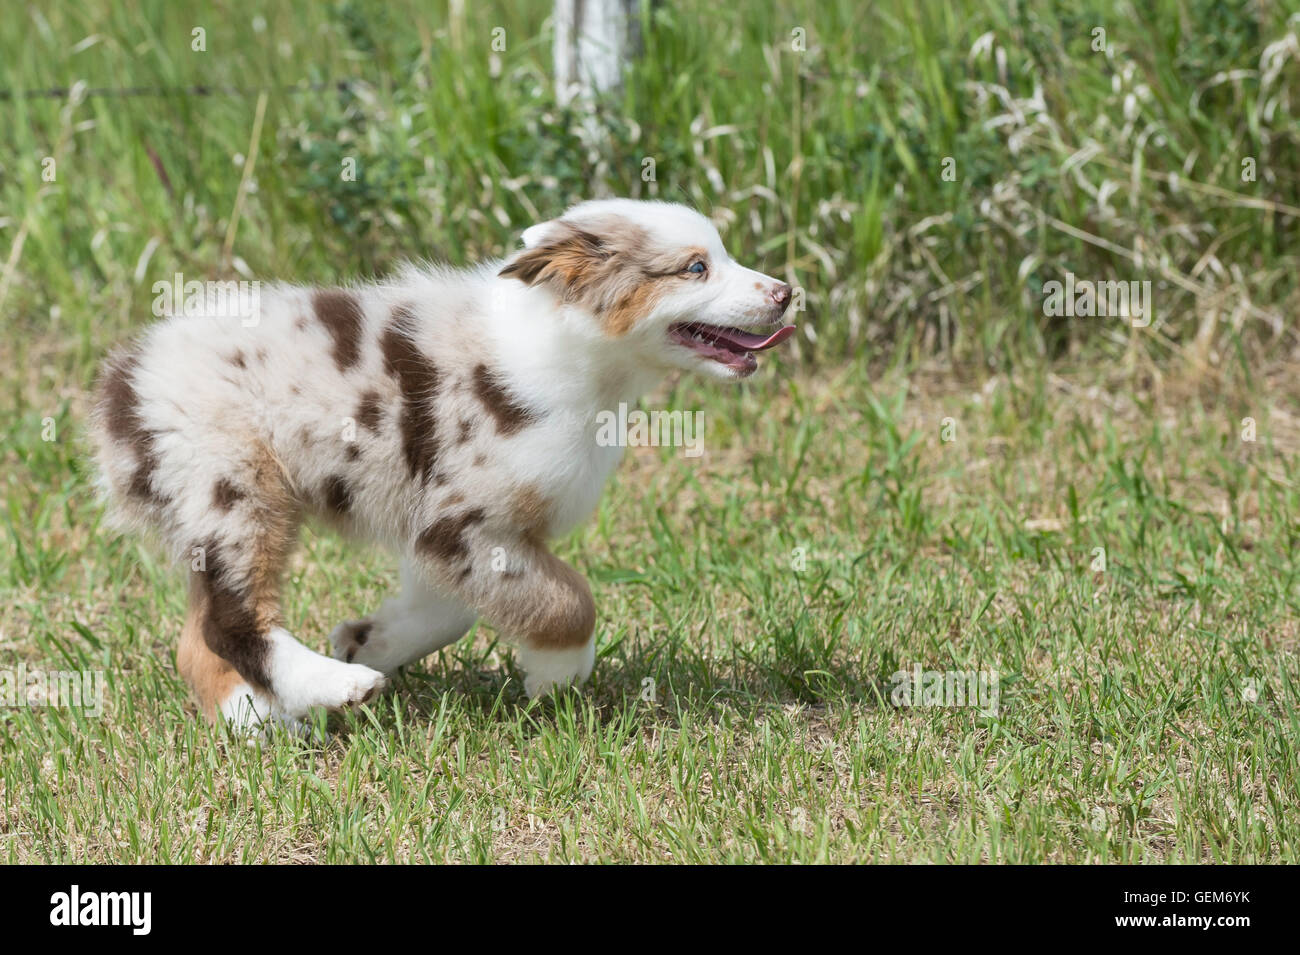 Neuf semaines merle rouge chien berger australien, chiot Photo Stock - Alamy